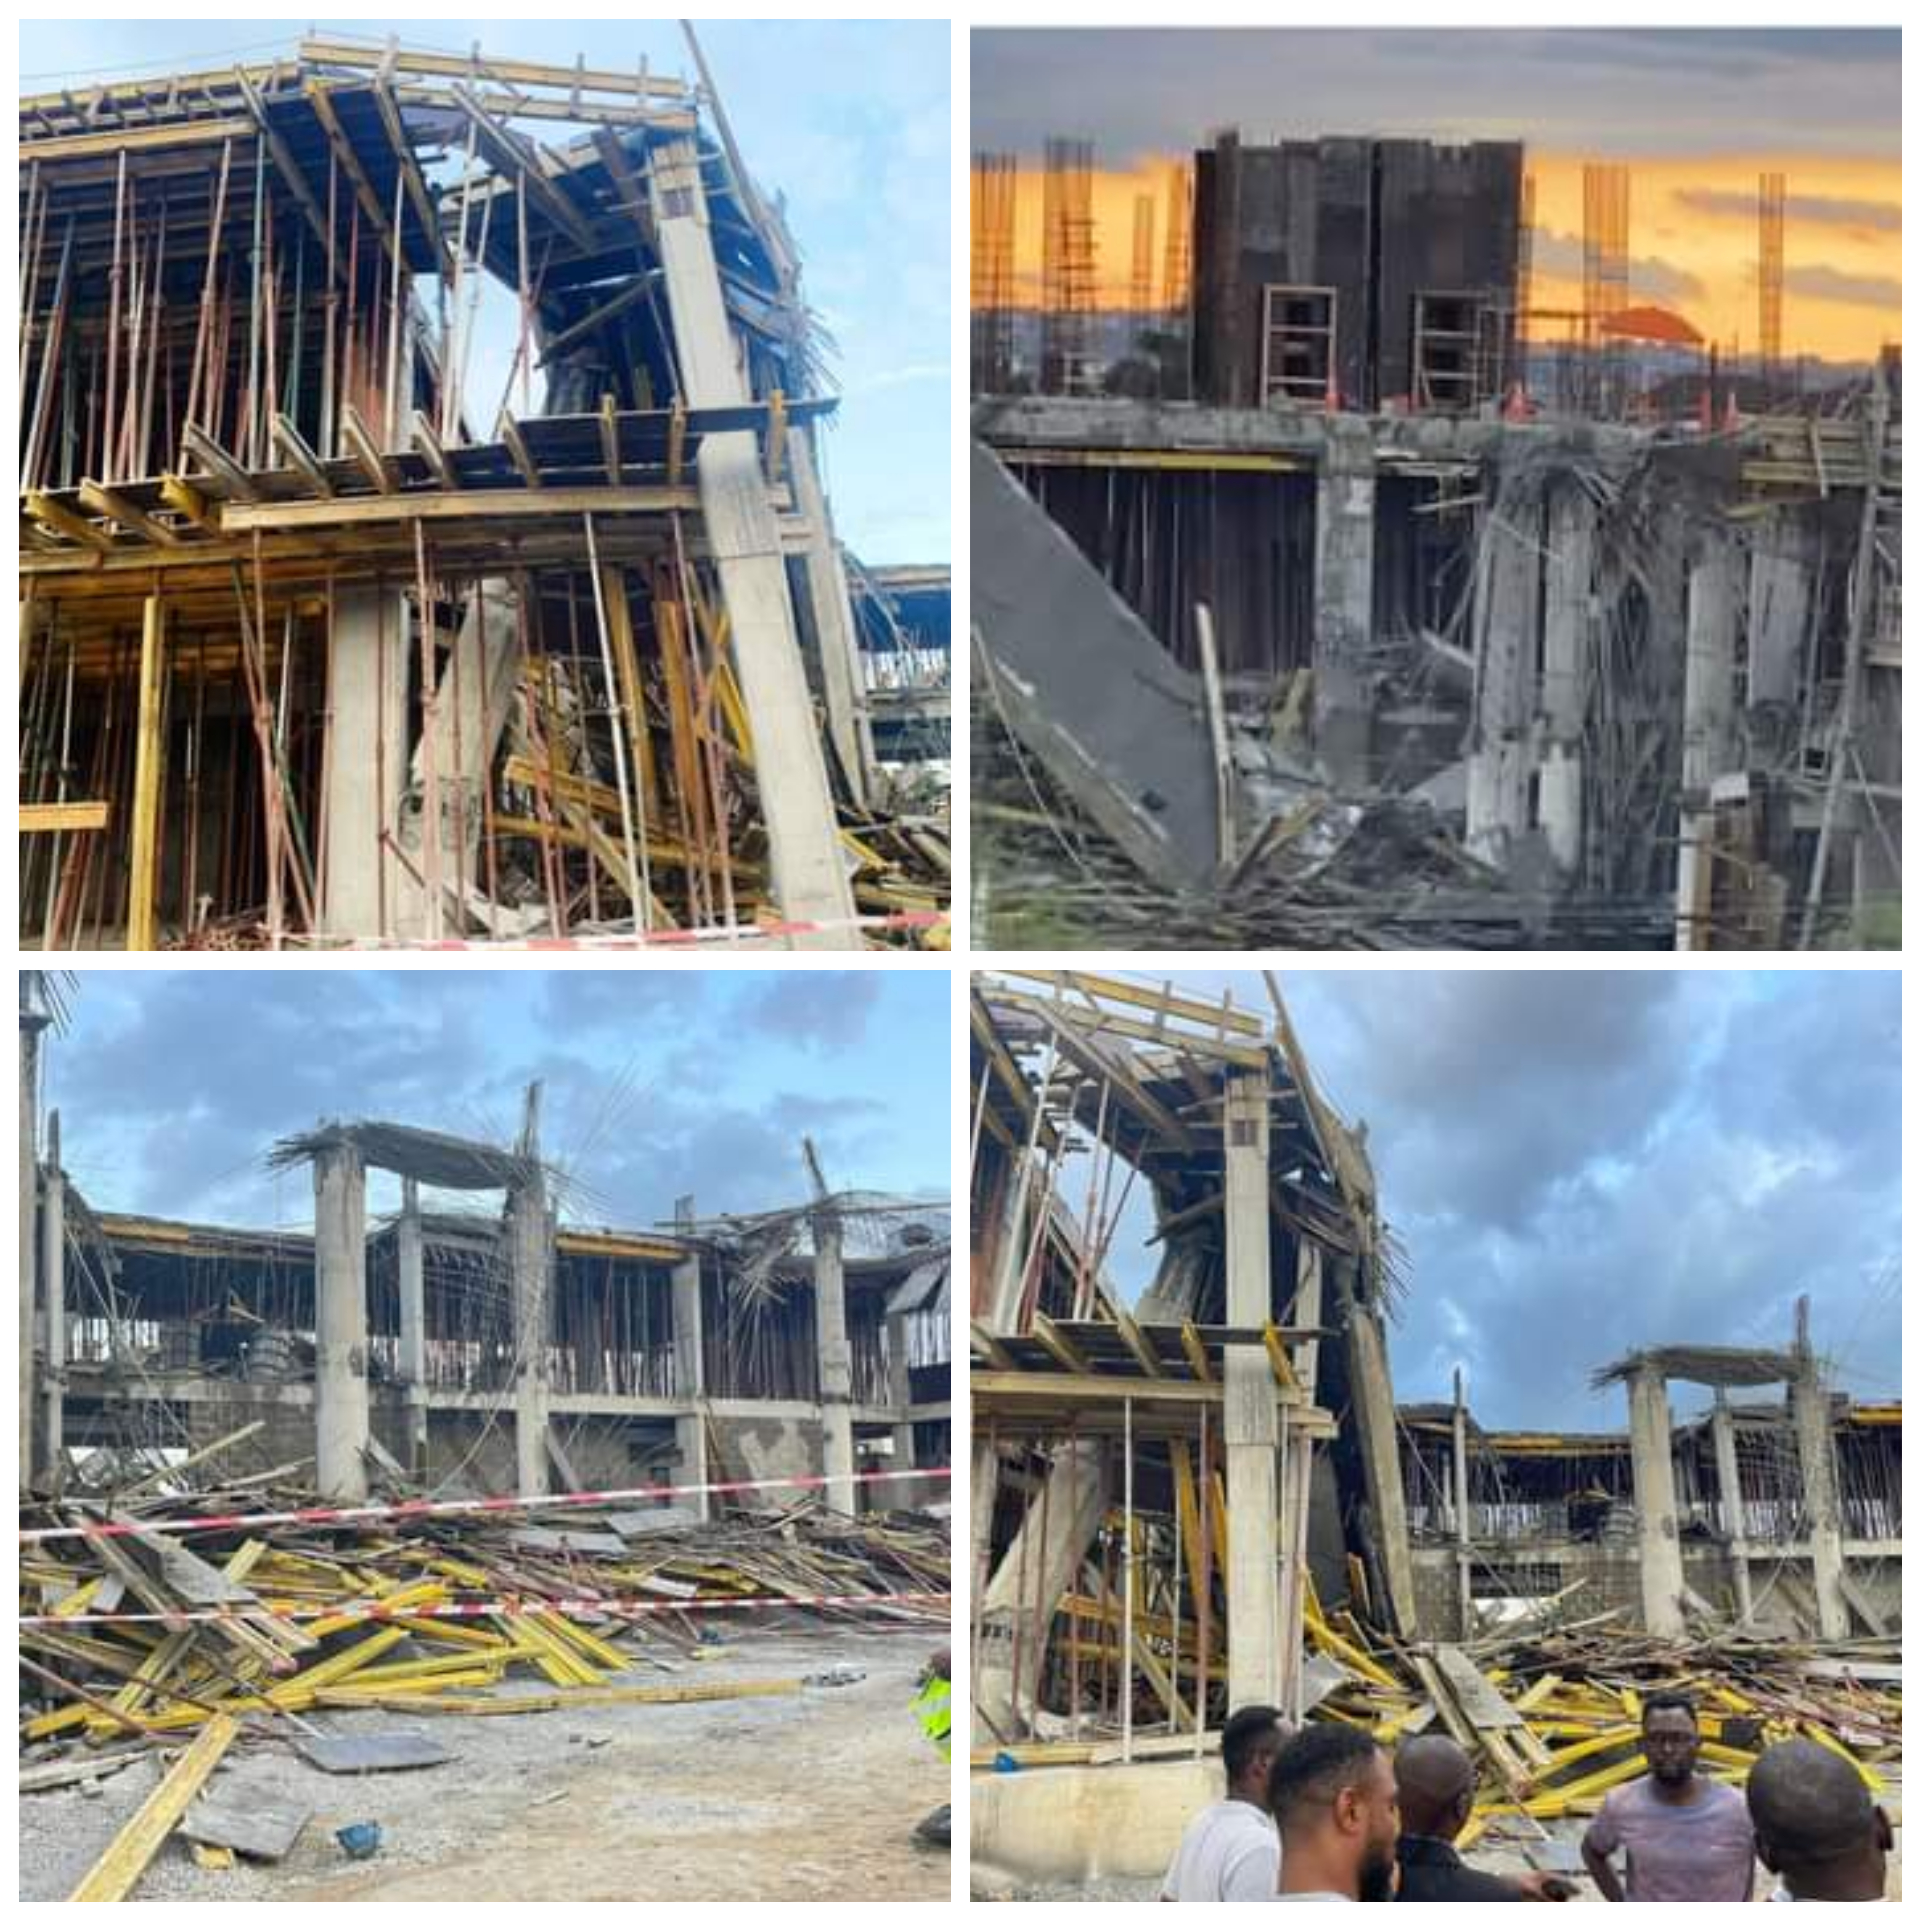 JUST IN: 8 injured as multiple storey building under construction collapses in Delta